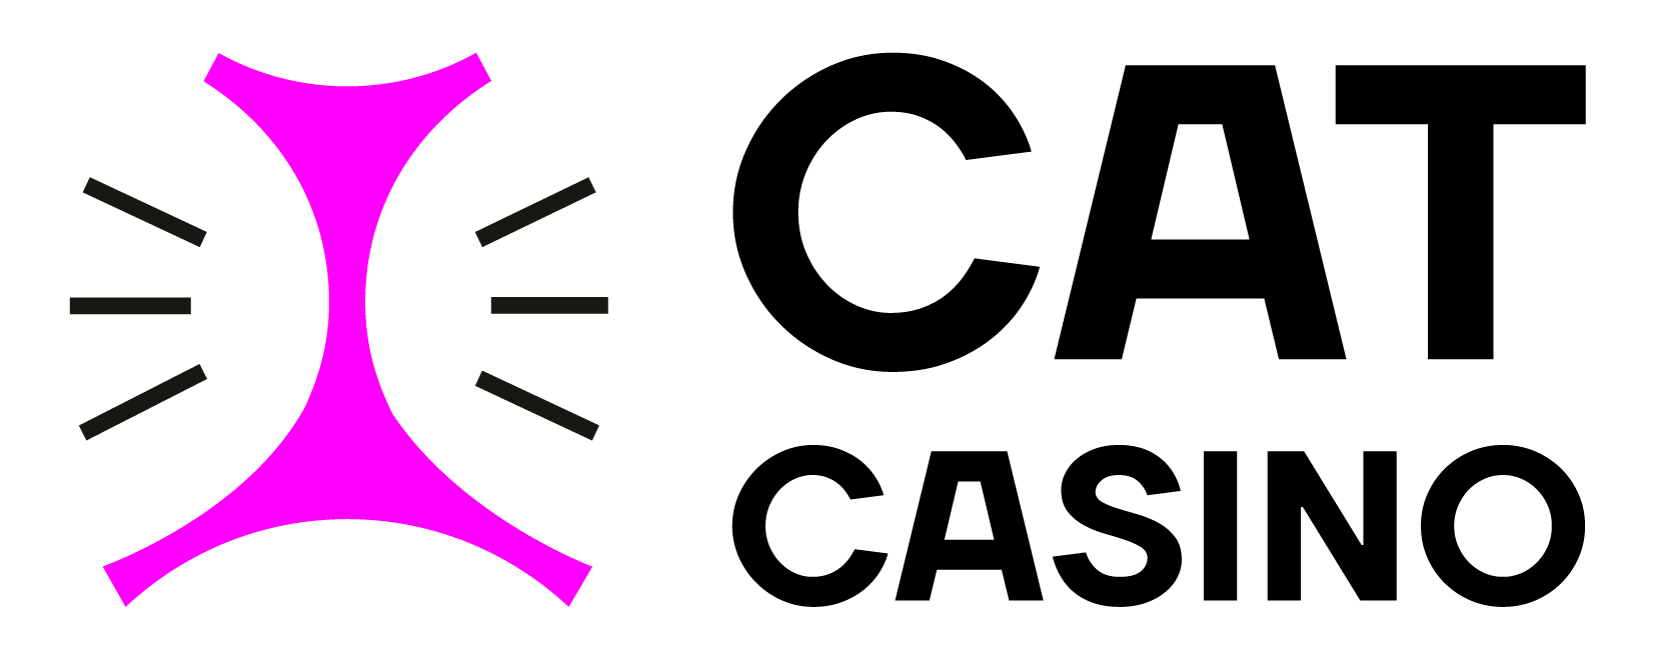 CatCasino coupons and bonus codes for new customers